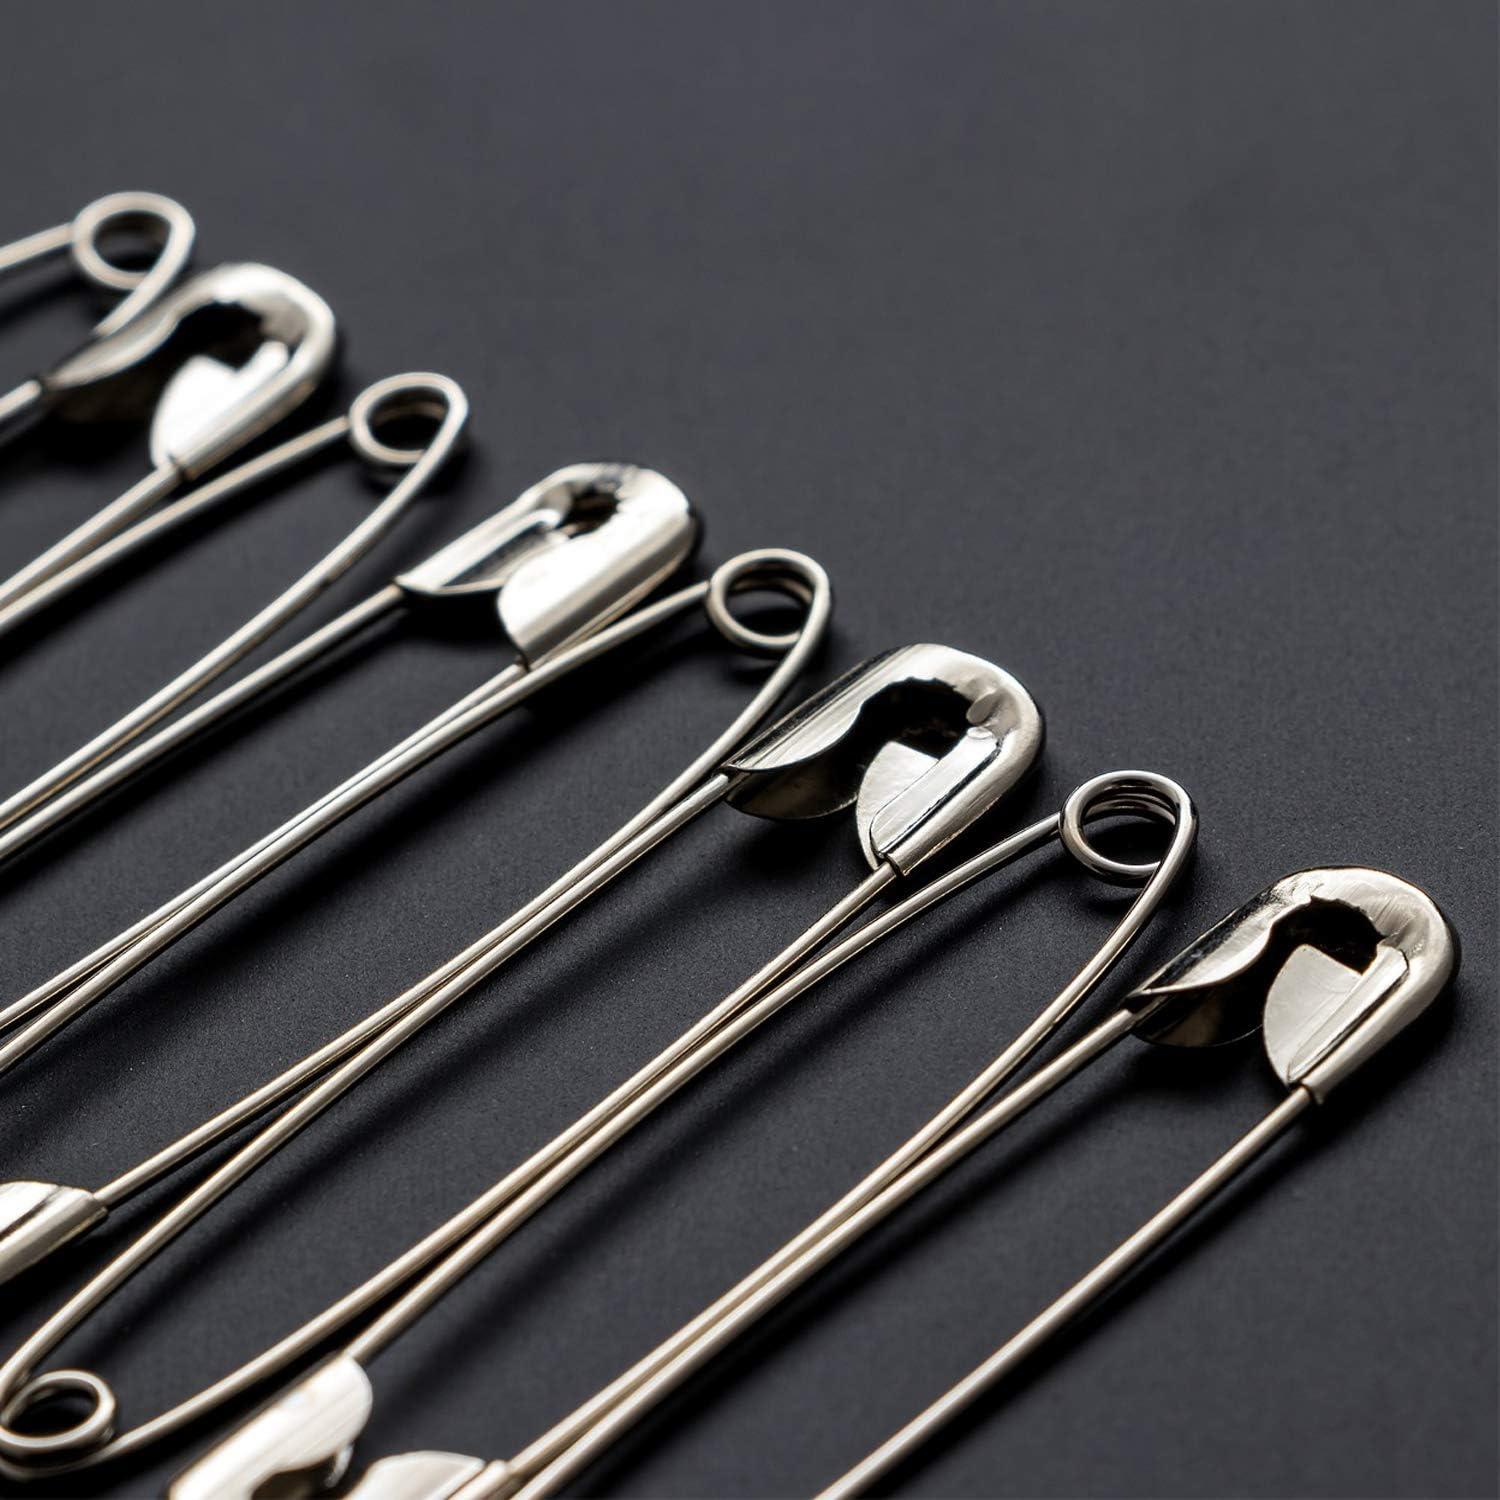 Safety Pin, Craft Pins, For Clothes, Diy, Arts Crafts(1000pcs, Silver) -t